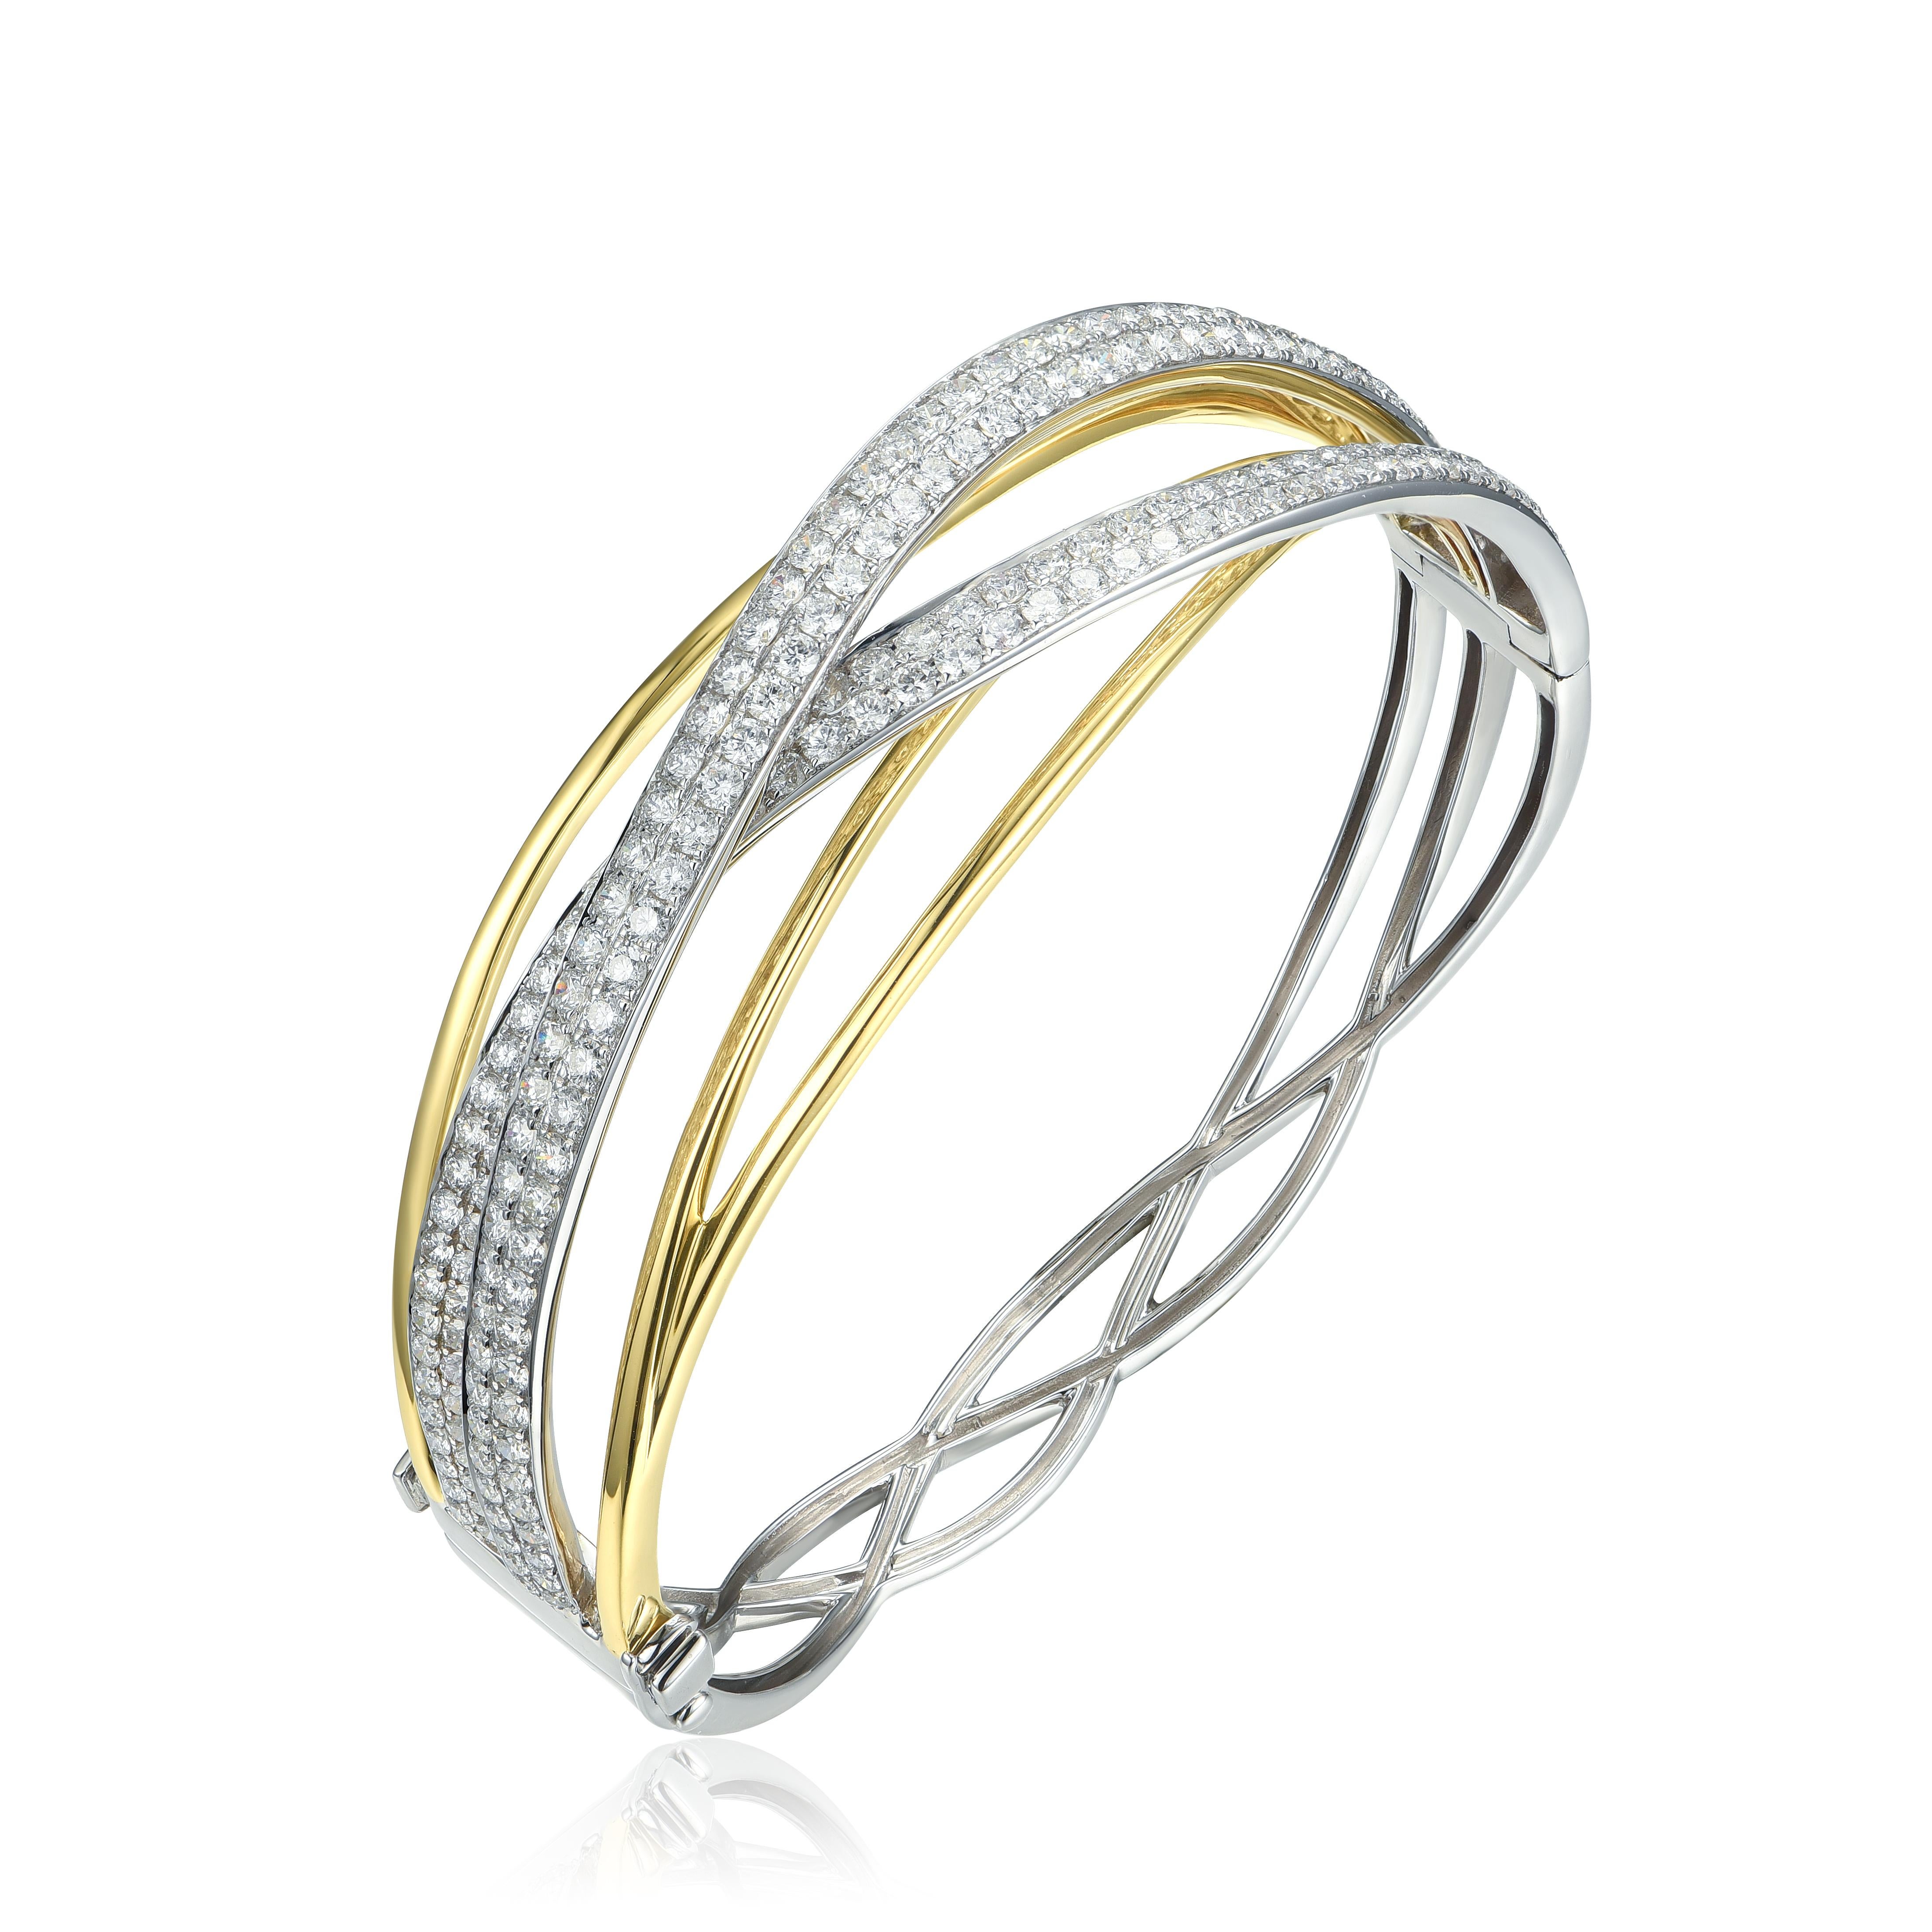 This crossover diamond bracelet gives you a stacked look with just one bracelet. The two tones of gold make it very versatile. It has 6.04cts of G color, VS2 clarity, round brilliant diamonds set in 18k white gold with yellow gold as well. 